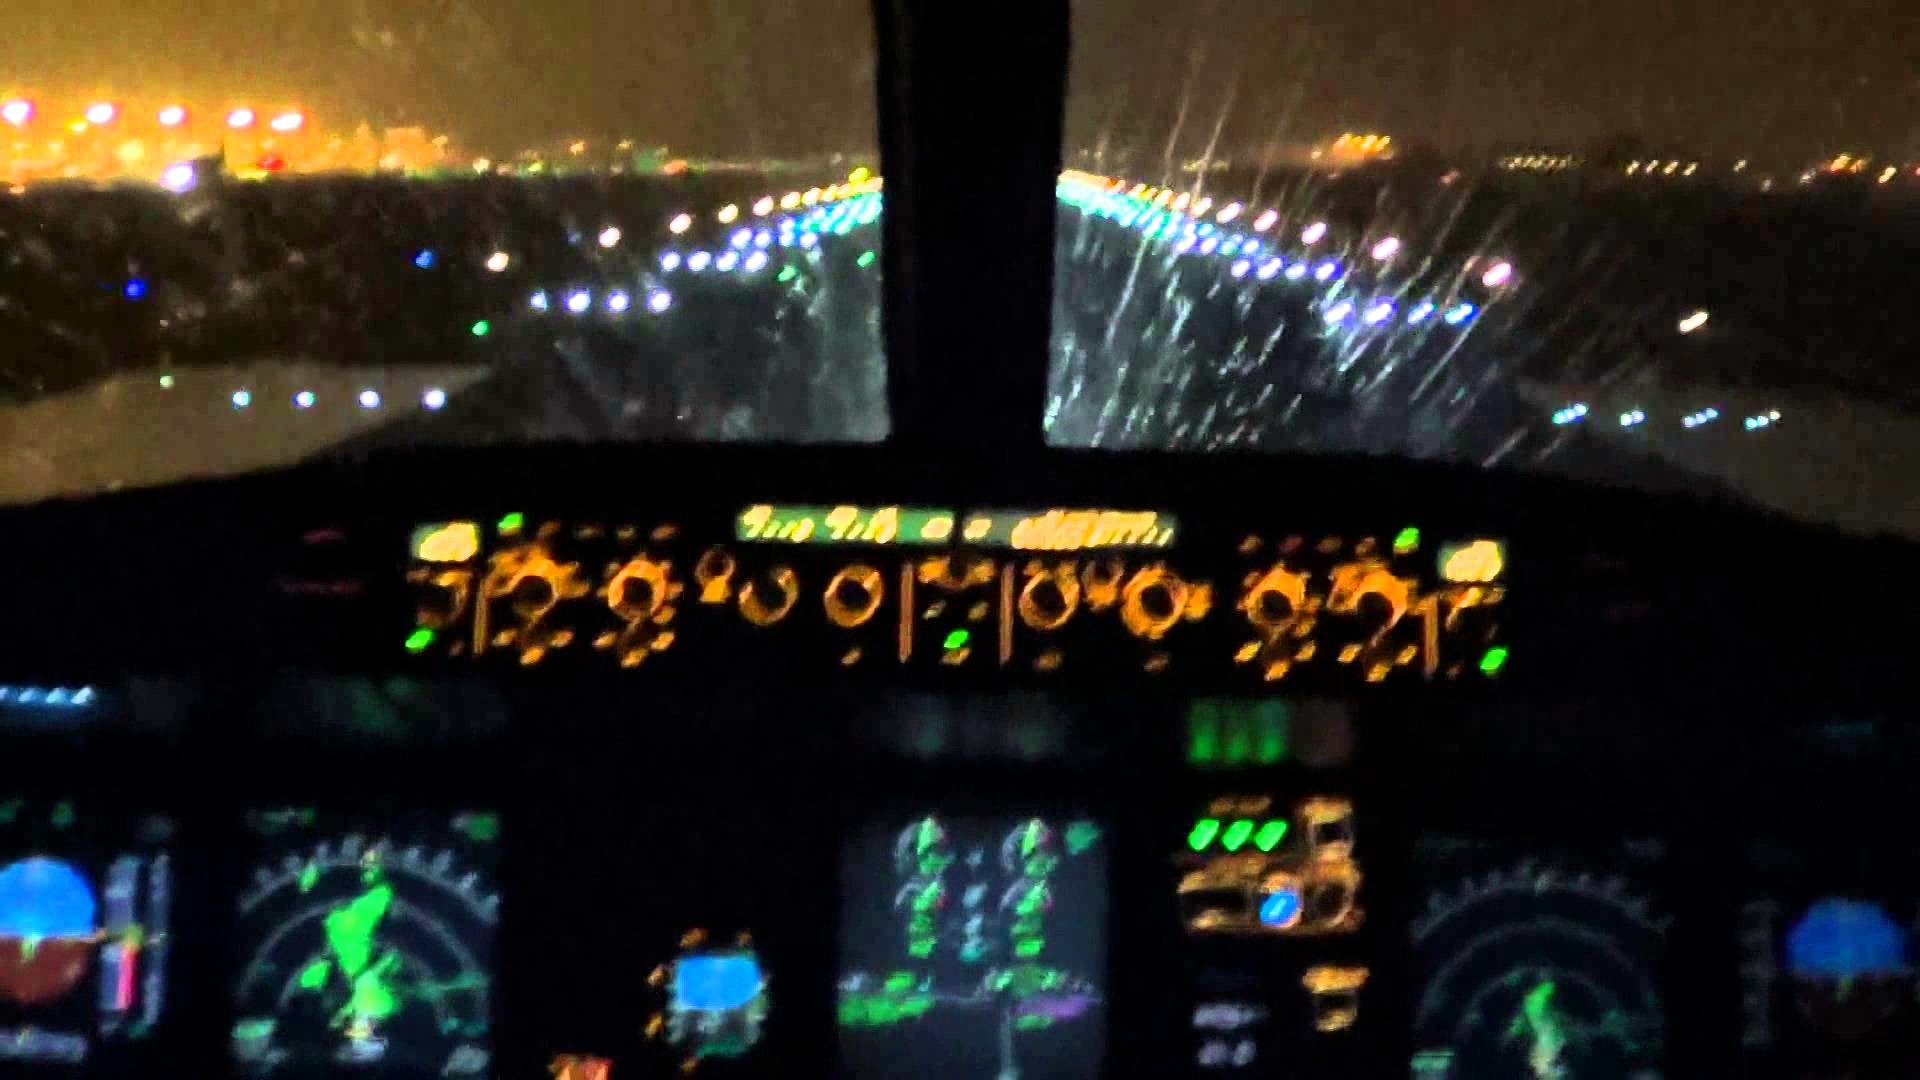 1920x1080 [Cockpit view] Brussels Airlines Airbus A319-111 rainy night takeoff at  Brussels - YouTube